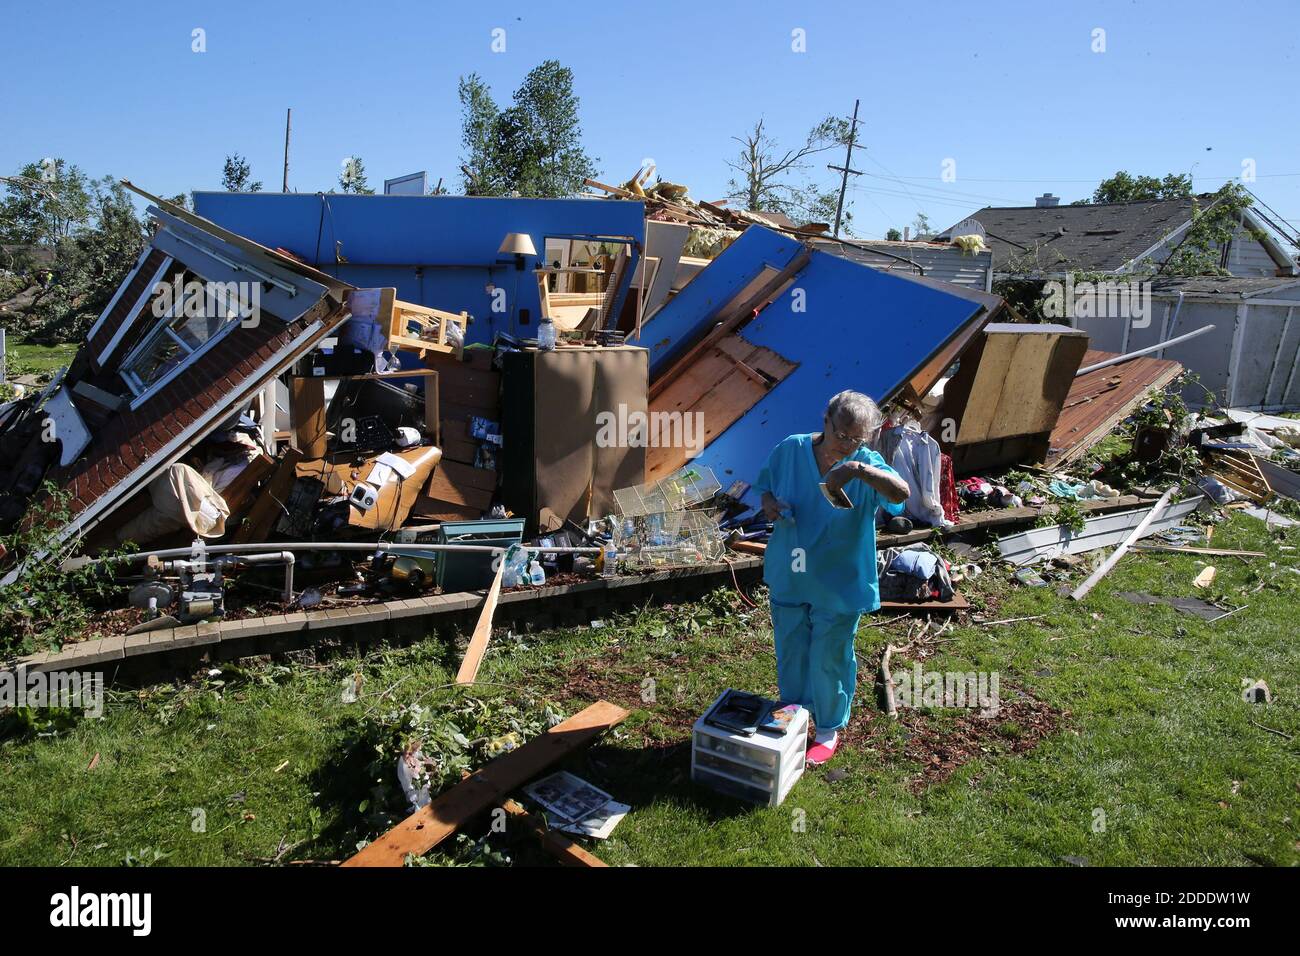 NO FILM, NO VIDEO, NO TV, NO DOCUMENTARY - Pat Reece deals with her destroyed house on Mazon Street in Coal City, IL, USA, on Tuesday, June 23, 2015, the morning after a severe storm tore through the area. Photo by Antonio Perez/Chicago Tribune/TNS/ABACAPRESS.COM Stock Photo